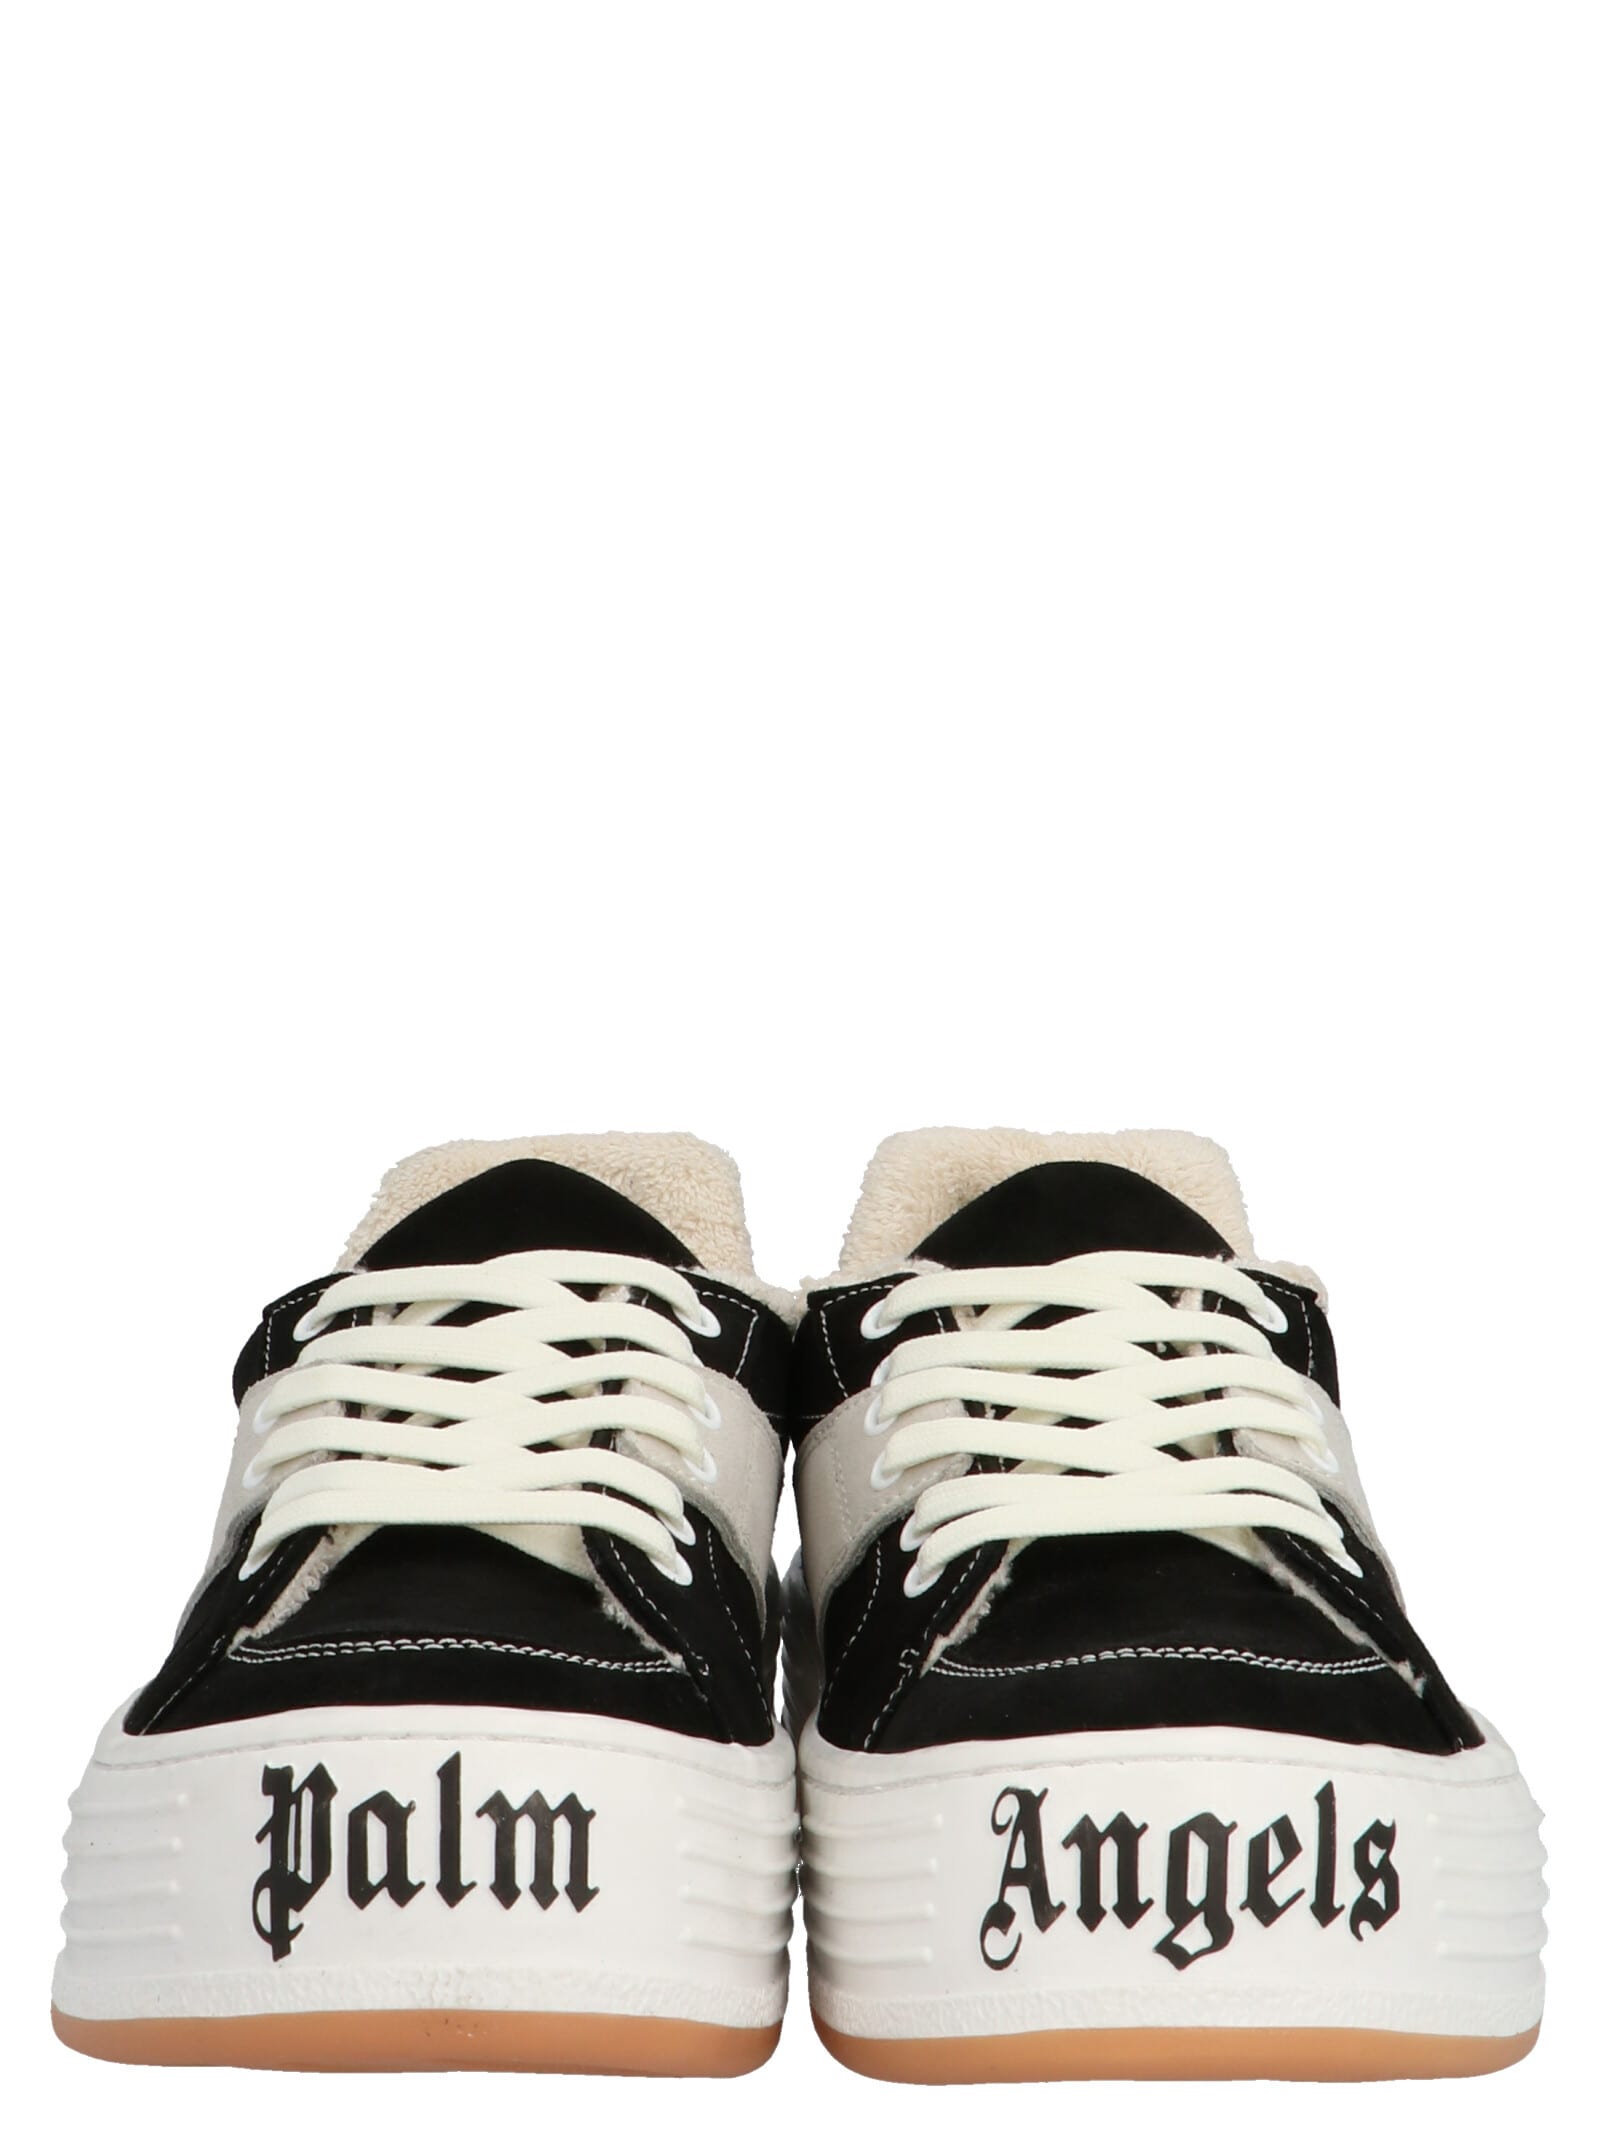 PALM ANGELS SNEAKERS,PMIA051F20LE A001 1001